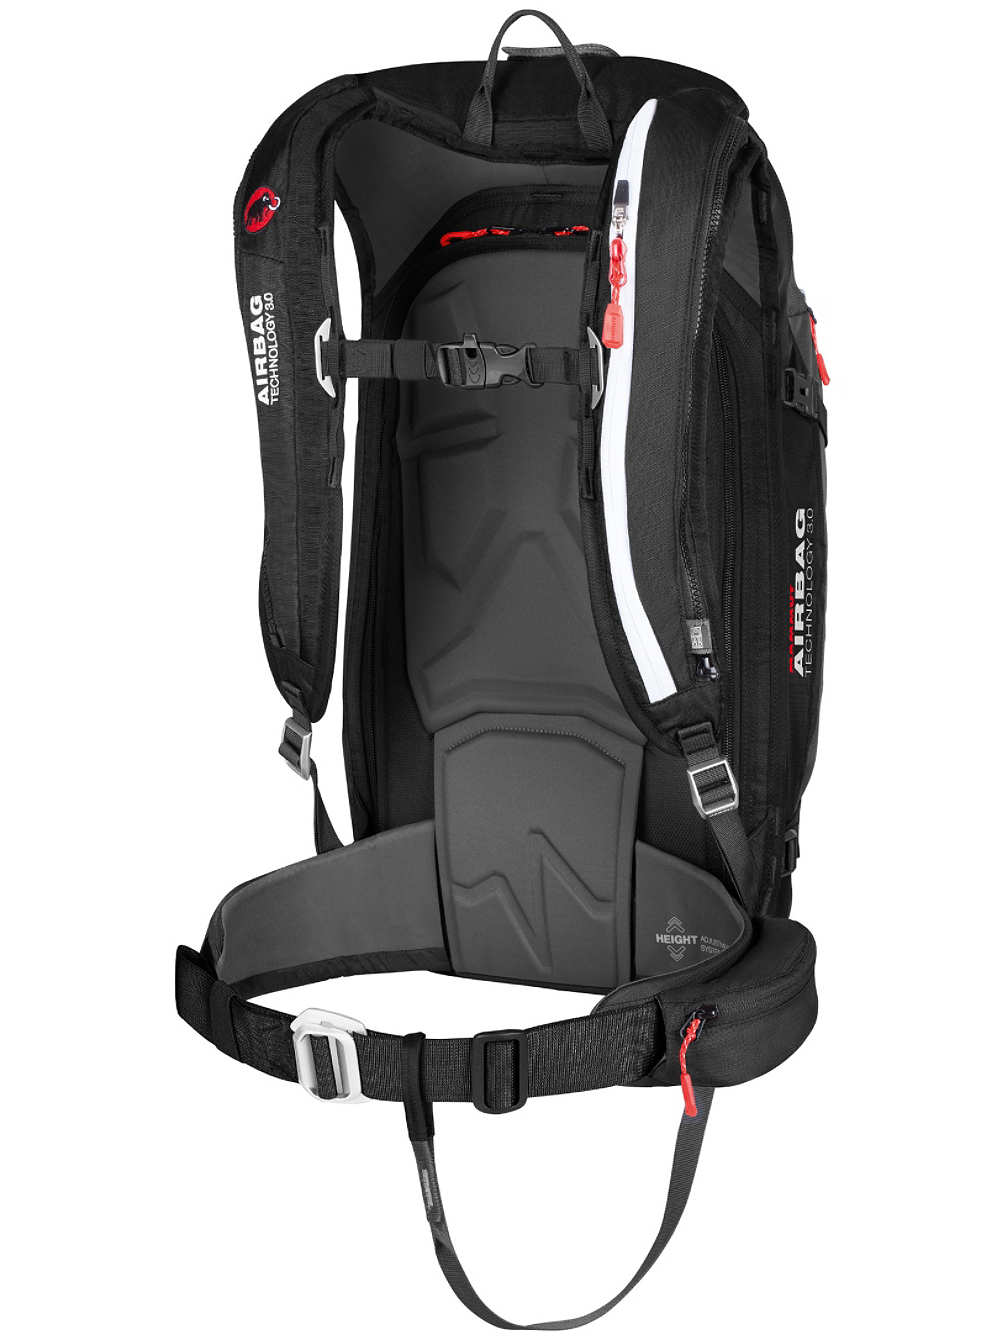 Pro+Protection+Airbag+3+0+35L+Backpack (1).jpg